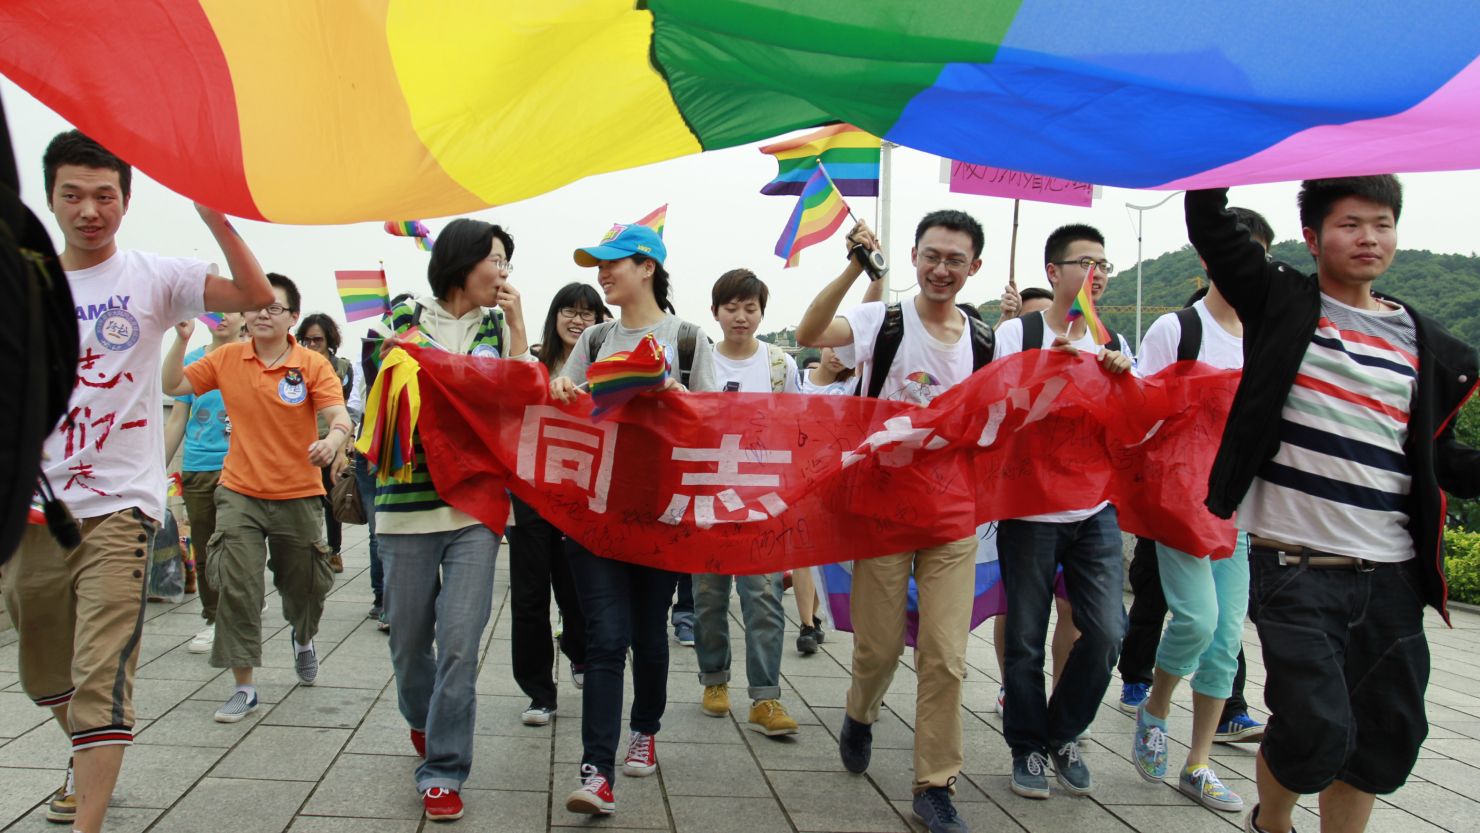 Pride events are held across China, with the largest in Shanghai every year.